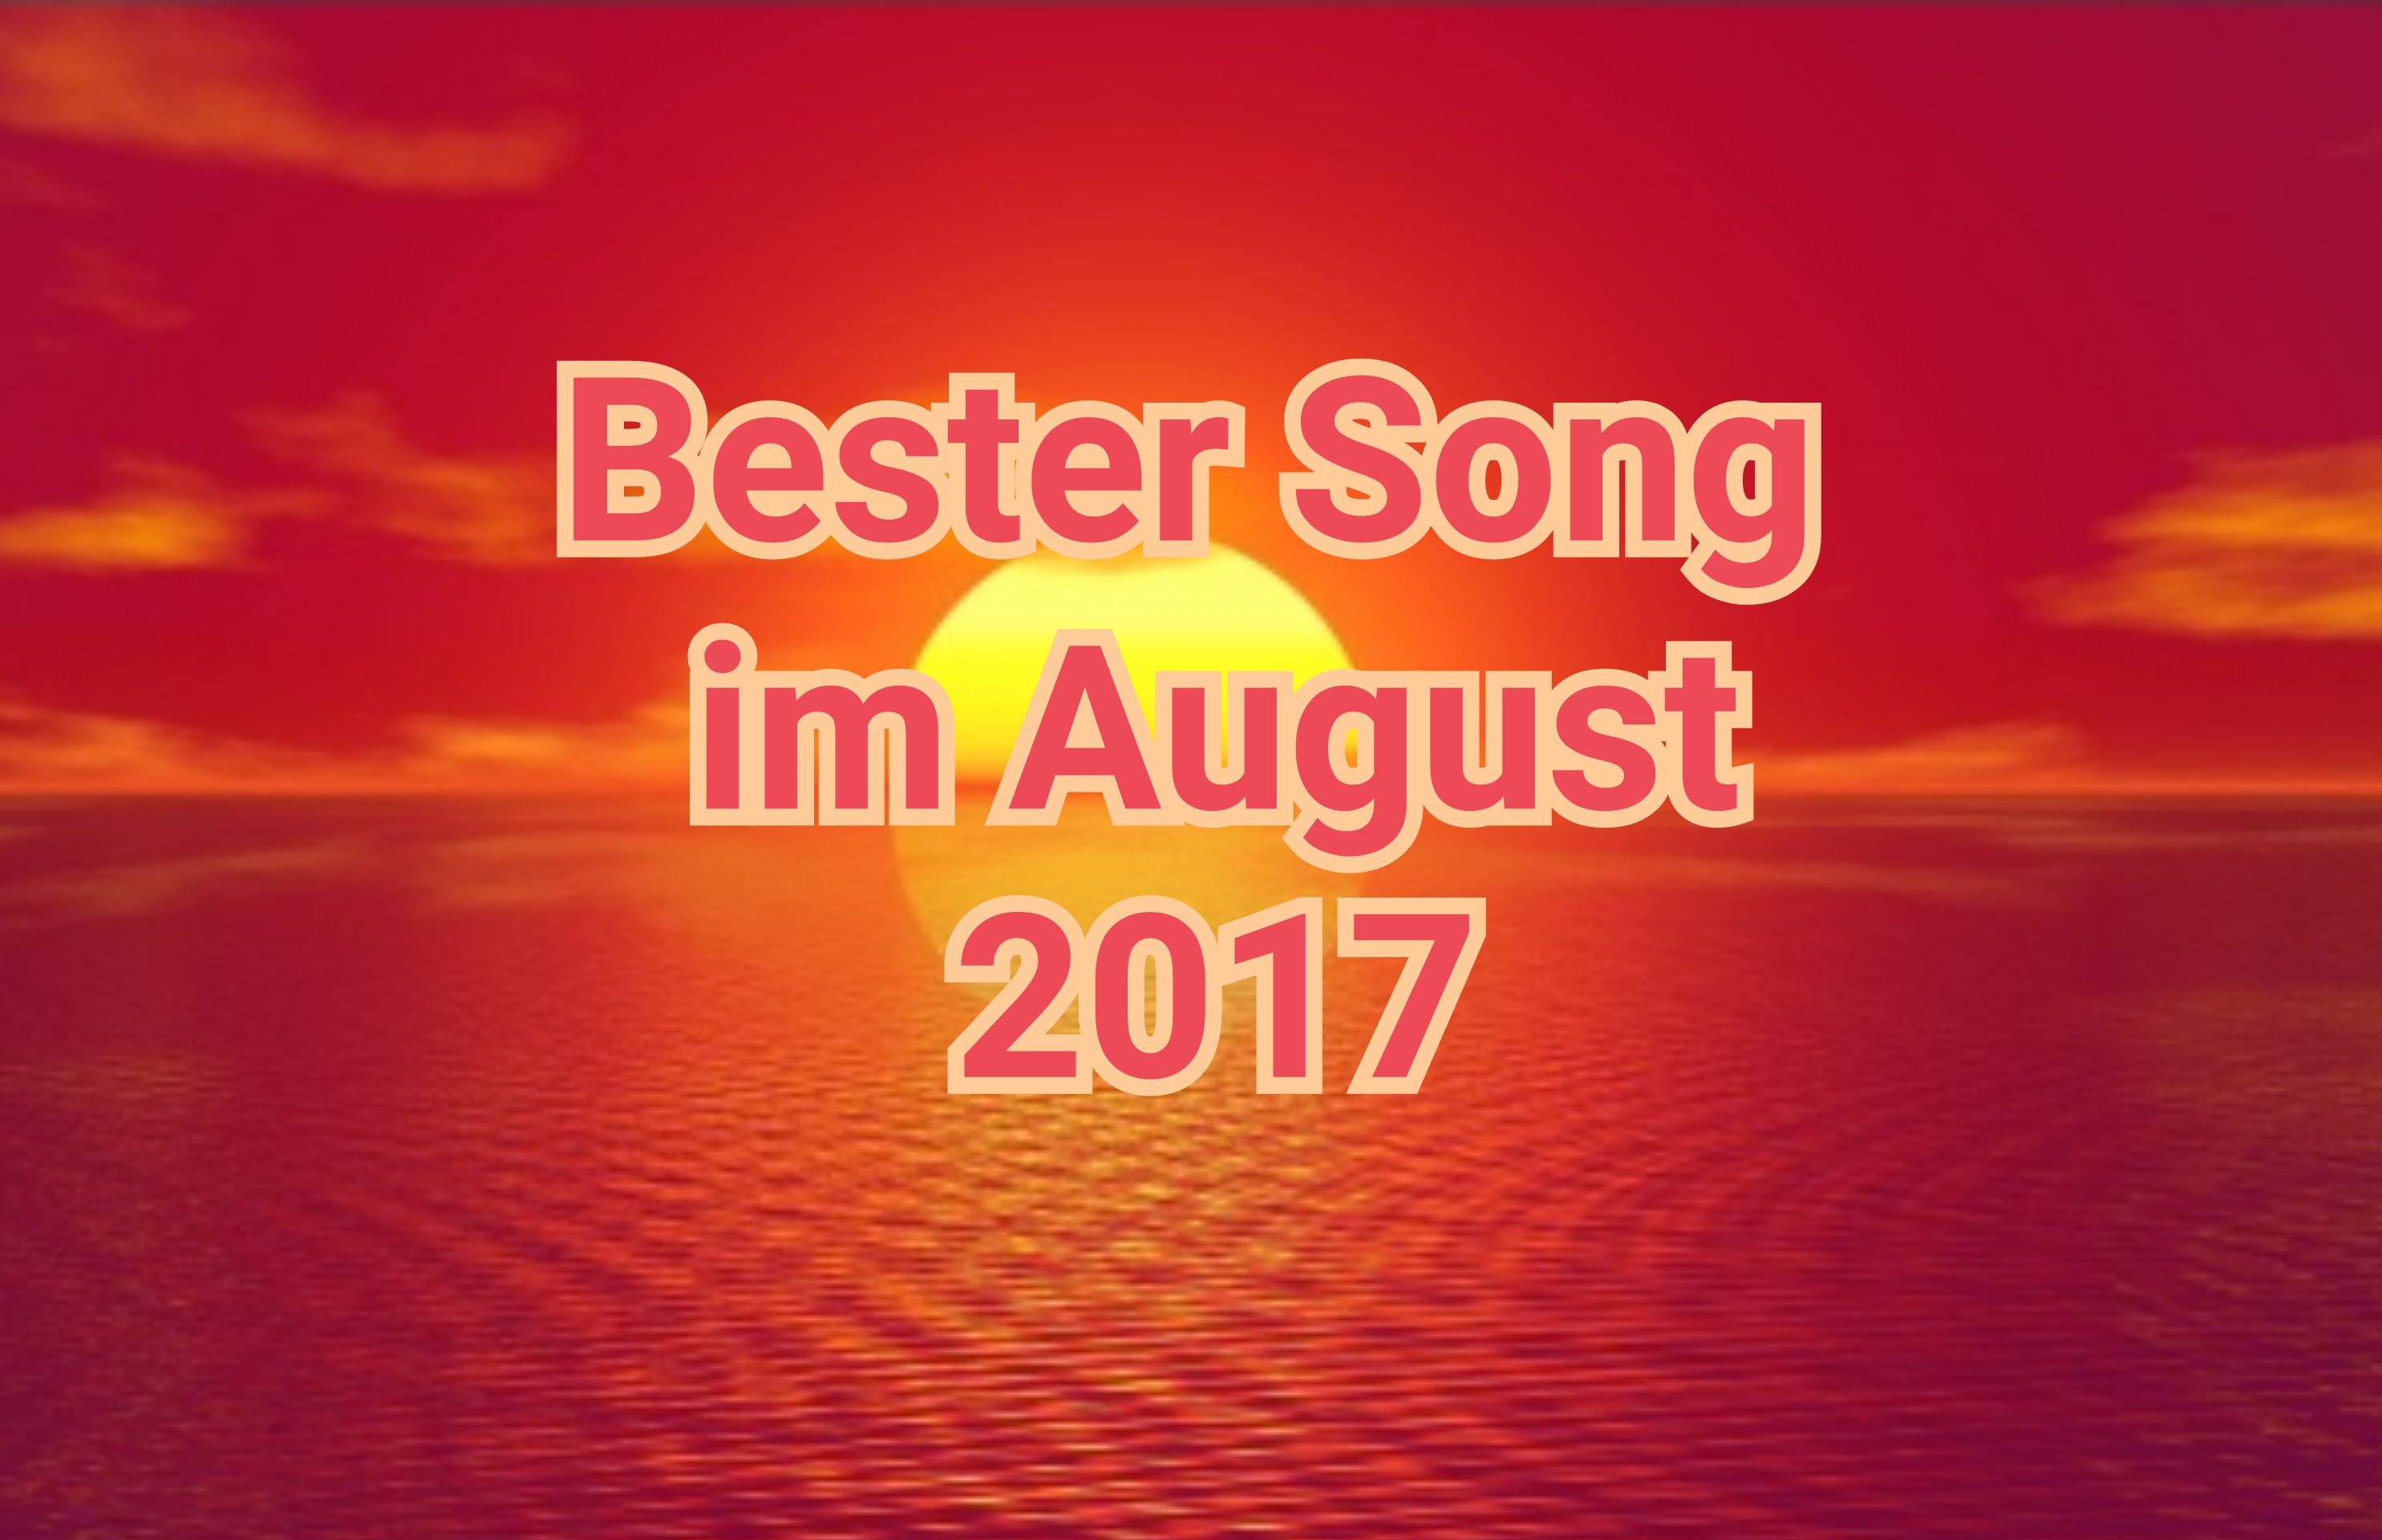 --Bester Song im August 2017--